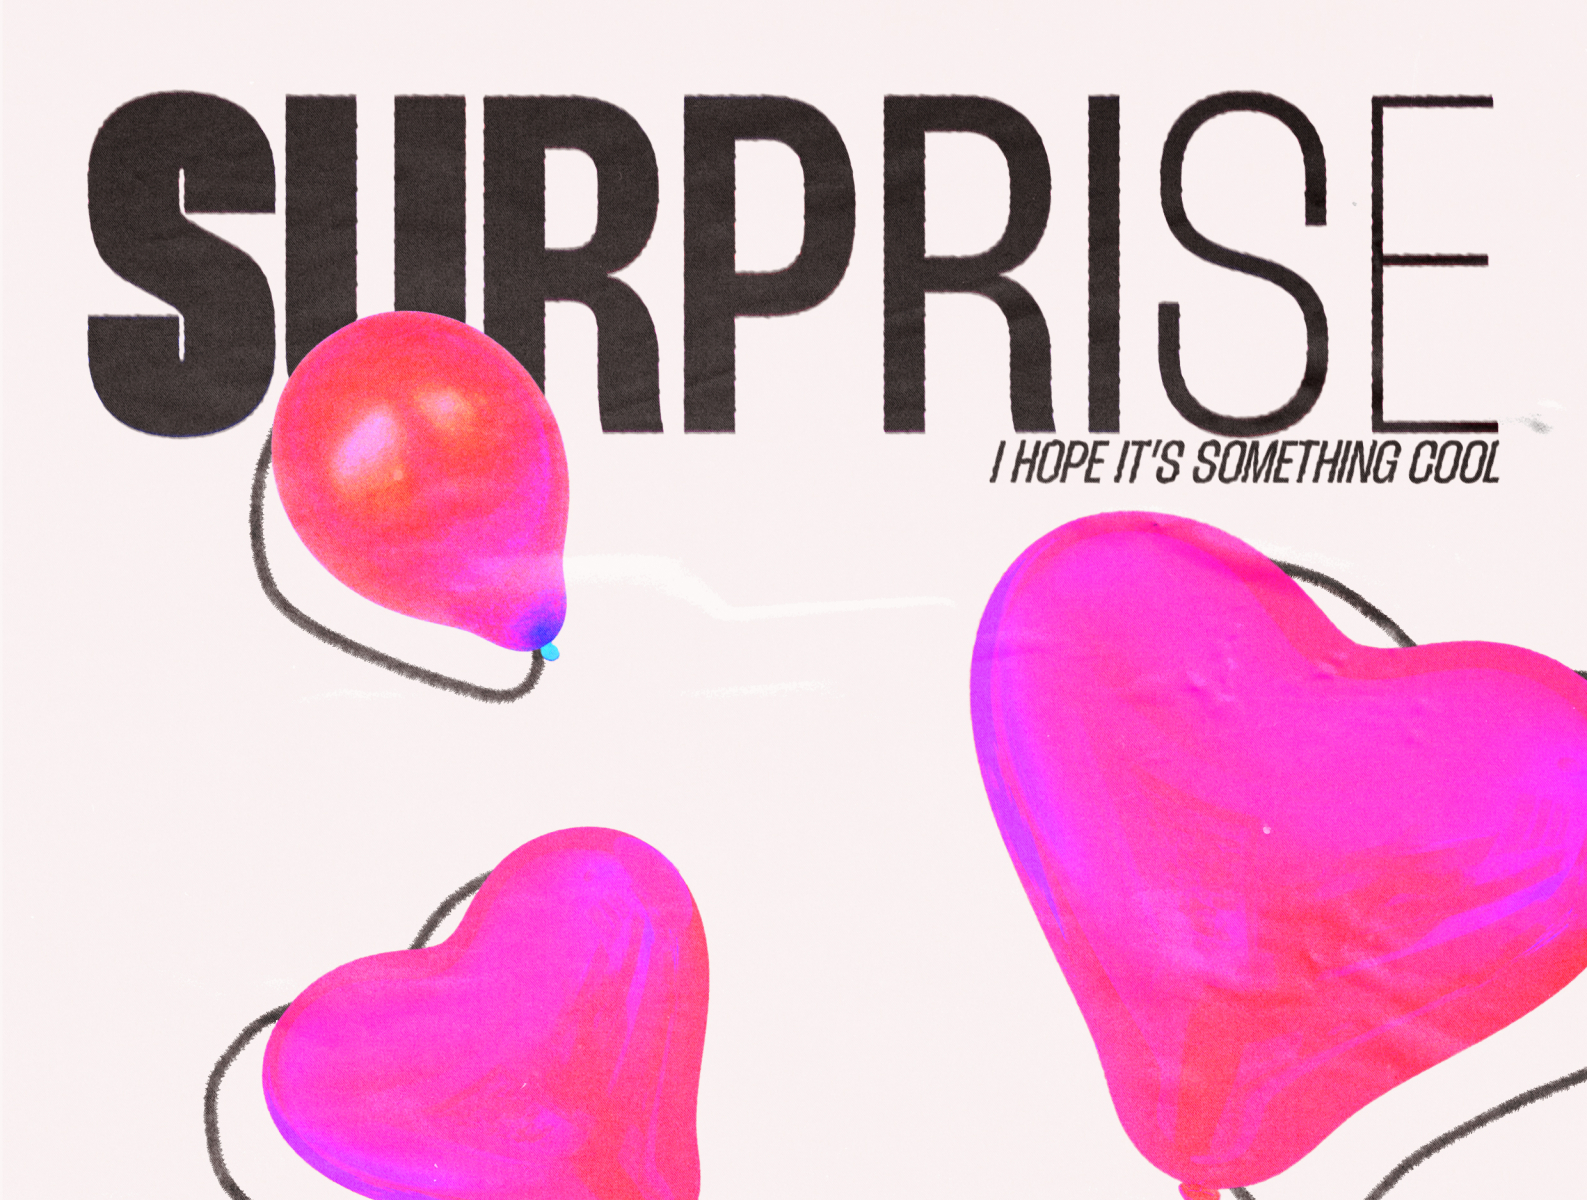 Surprise! by Ago Chiappano on Dribbble